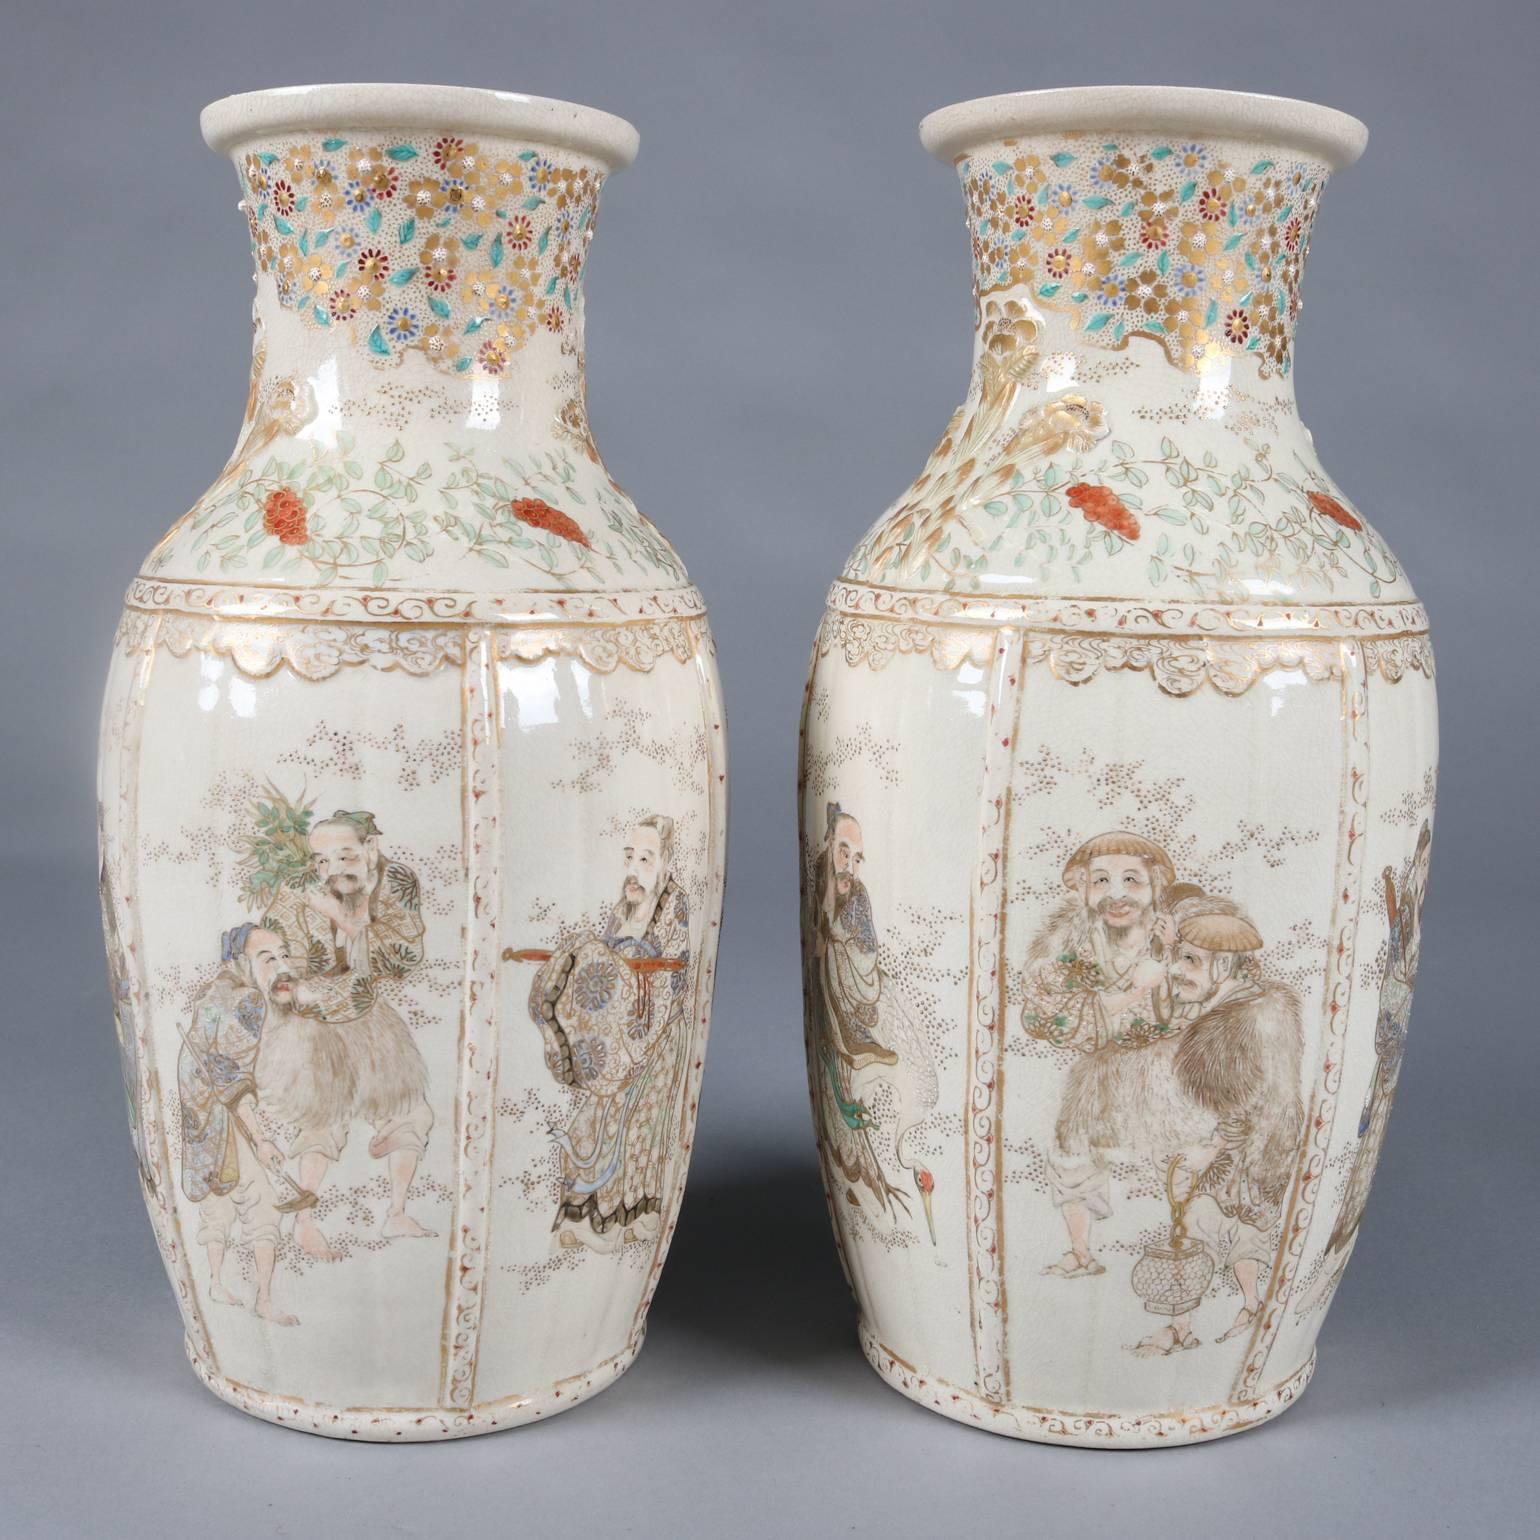 Pair of antique and fine Japanese Satsuma Meiji pottery vases feature hand-painted and gilt foliate, floral and scroll decoration with reserves depicting portraits of elder wise men, circa 1870.

Measure: 14" H x 7" Diam.